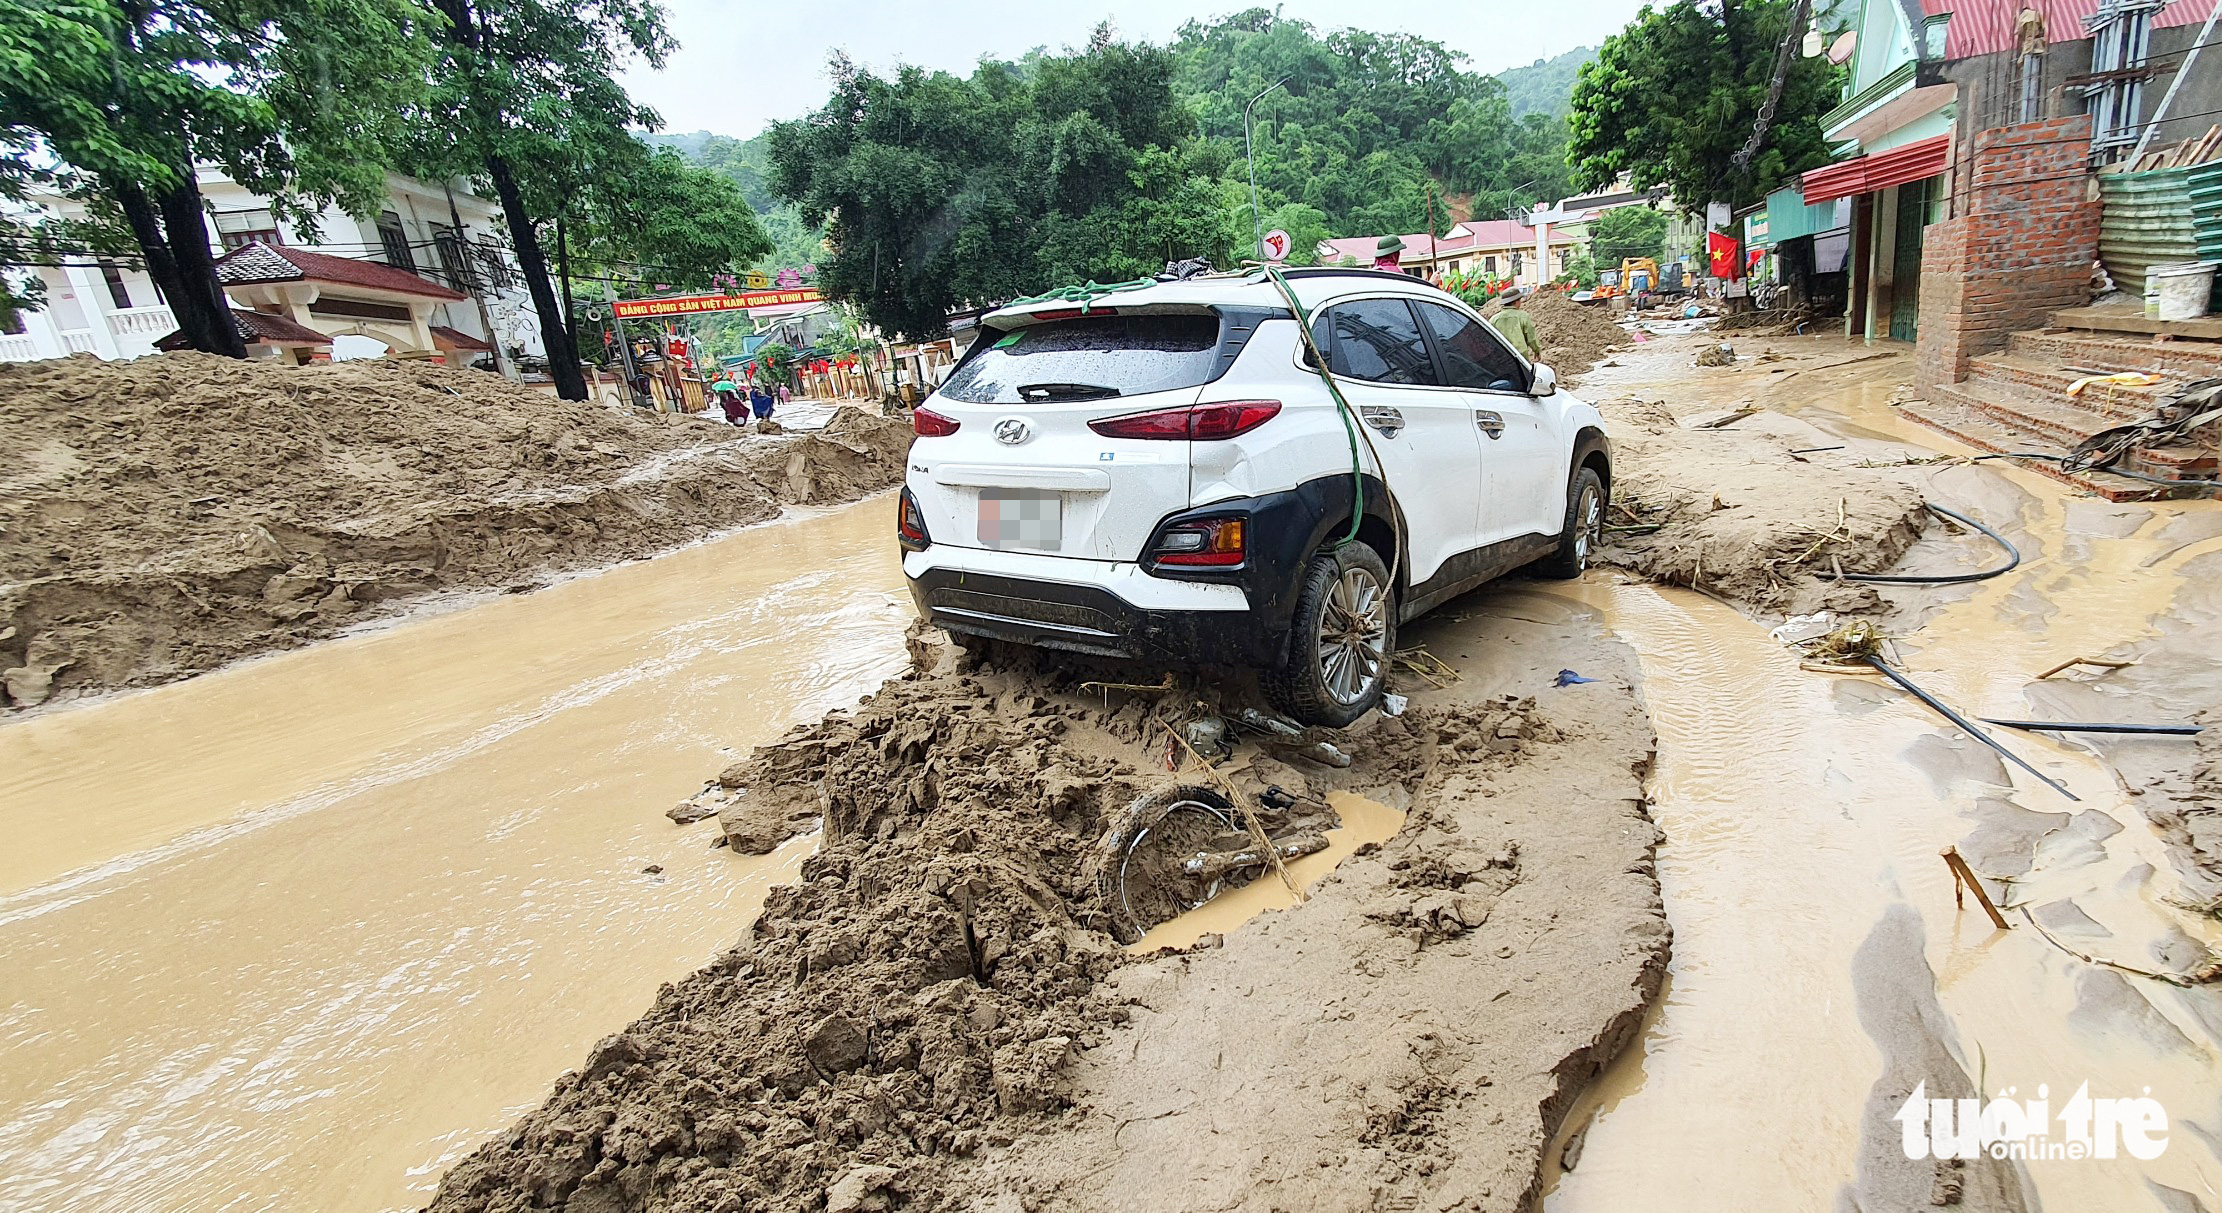 A car is left on a muddy street following a flash flood in Ky Son District, Nghe An Province, Vietnam, October 2, 2022. Photo: Duong Tinh / Tuoi Tre